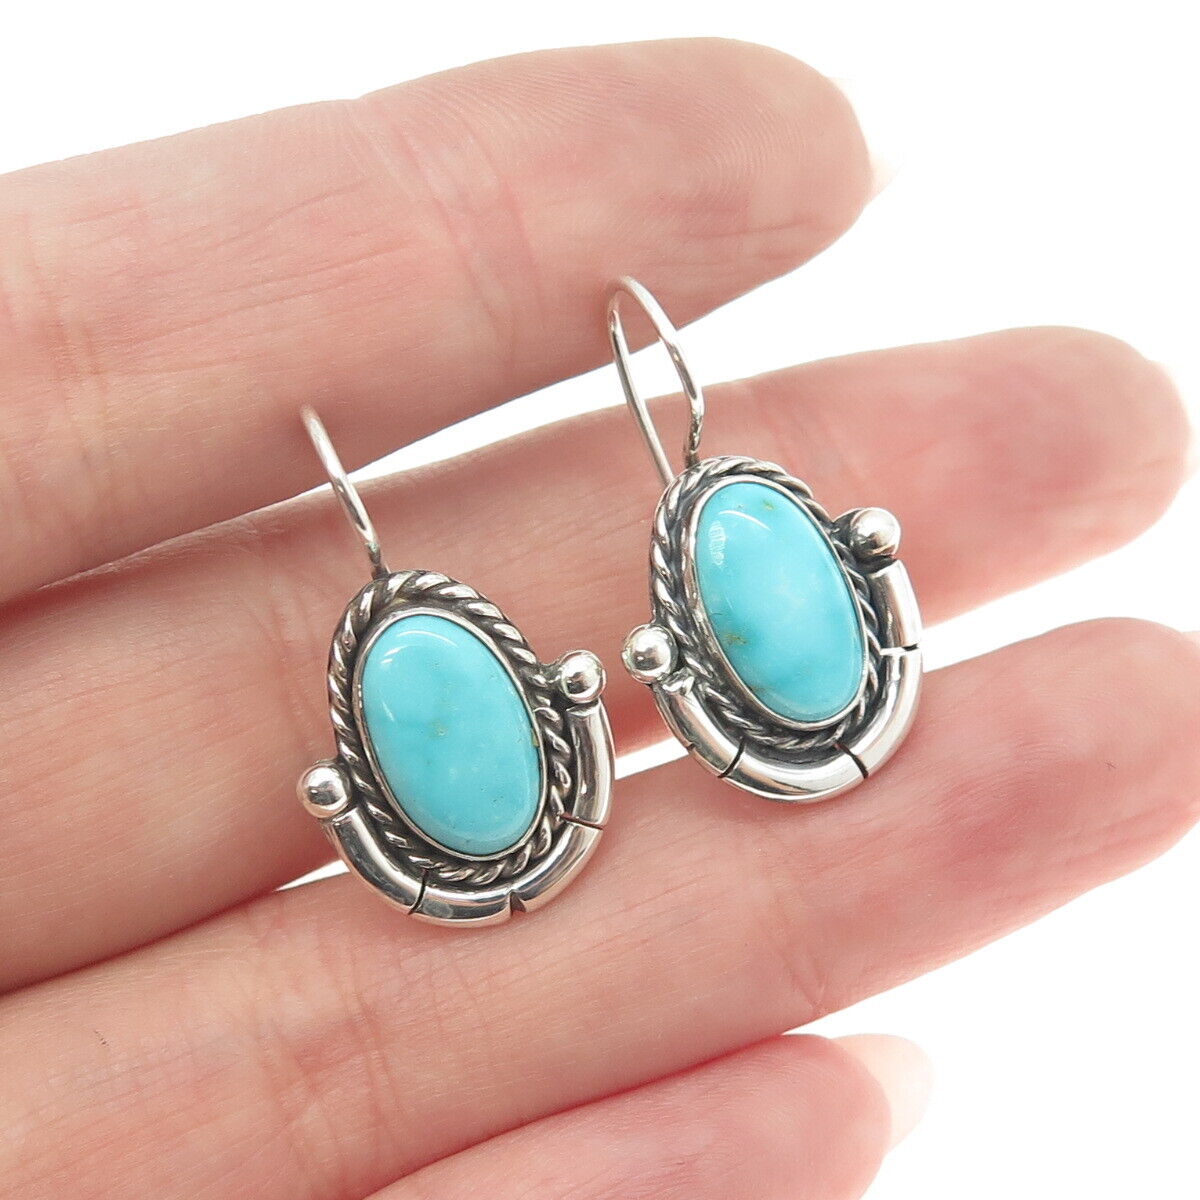 Old Pawn 925 Sterling Silver Vintage Southwestern Real Turquoise Tribal Earrings